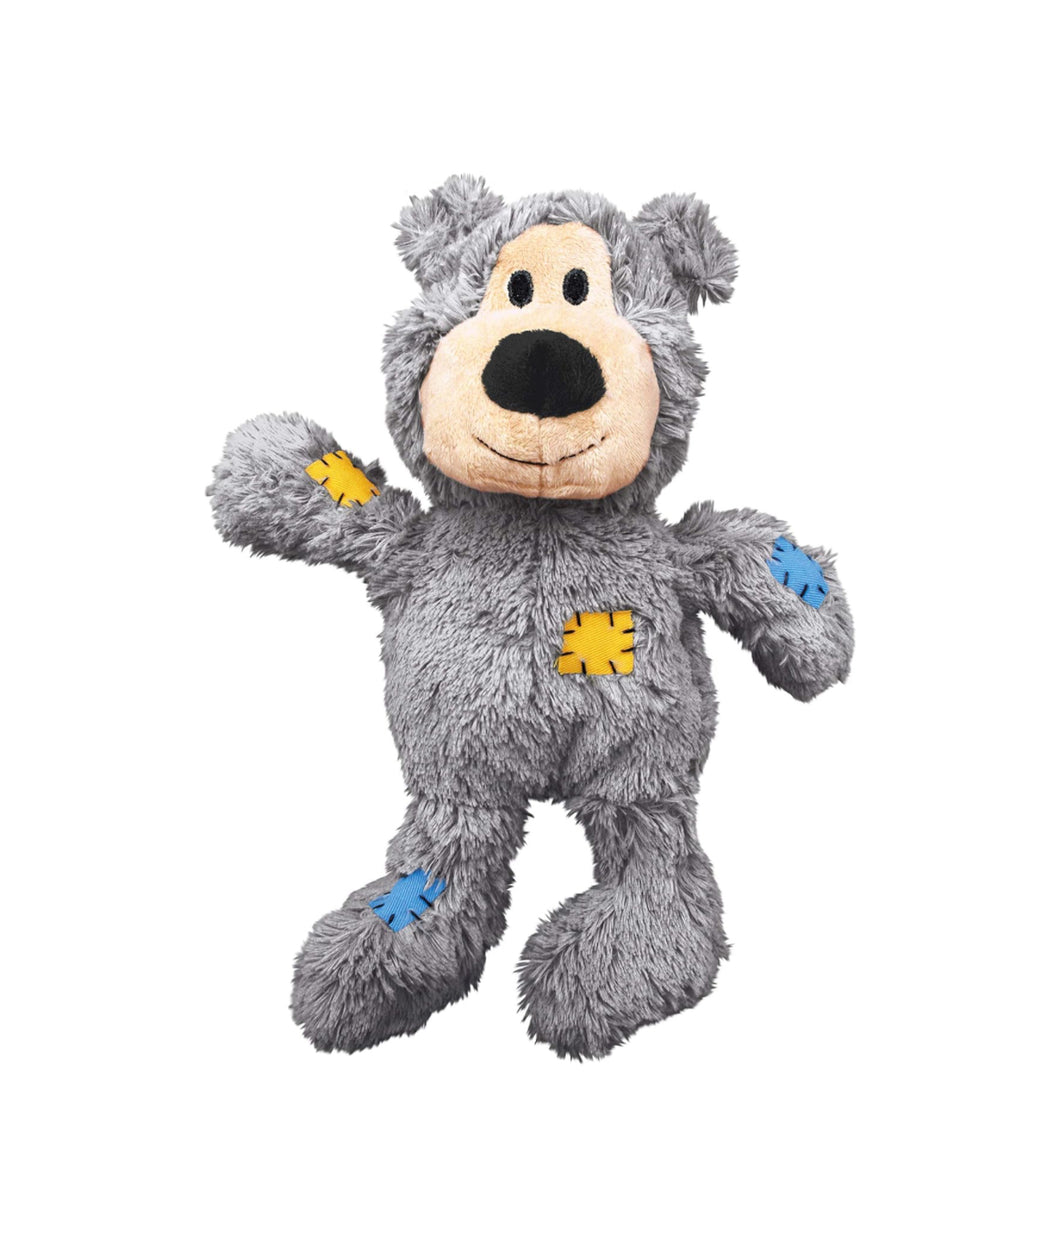 KONG Wild Knots Bear Dog Toy, comes in a range of sizes a sturdy and durable plush toy no